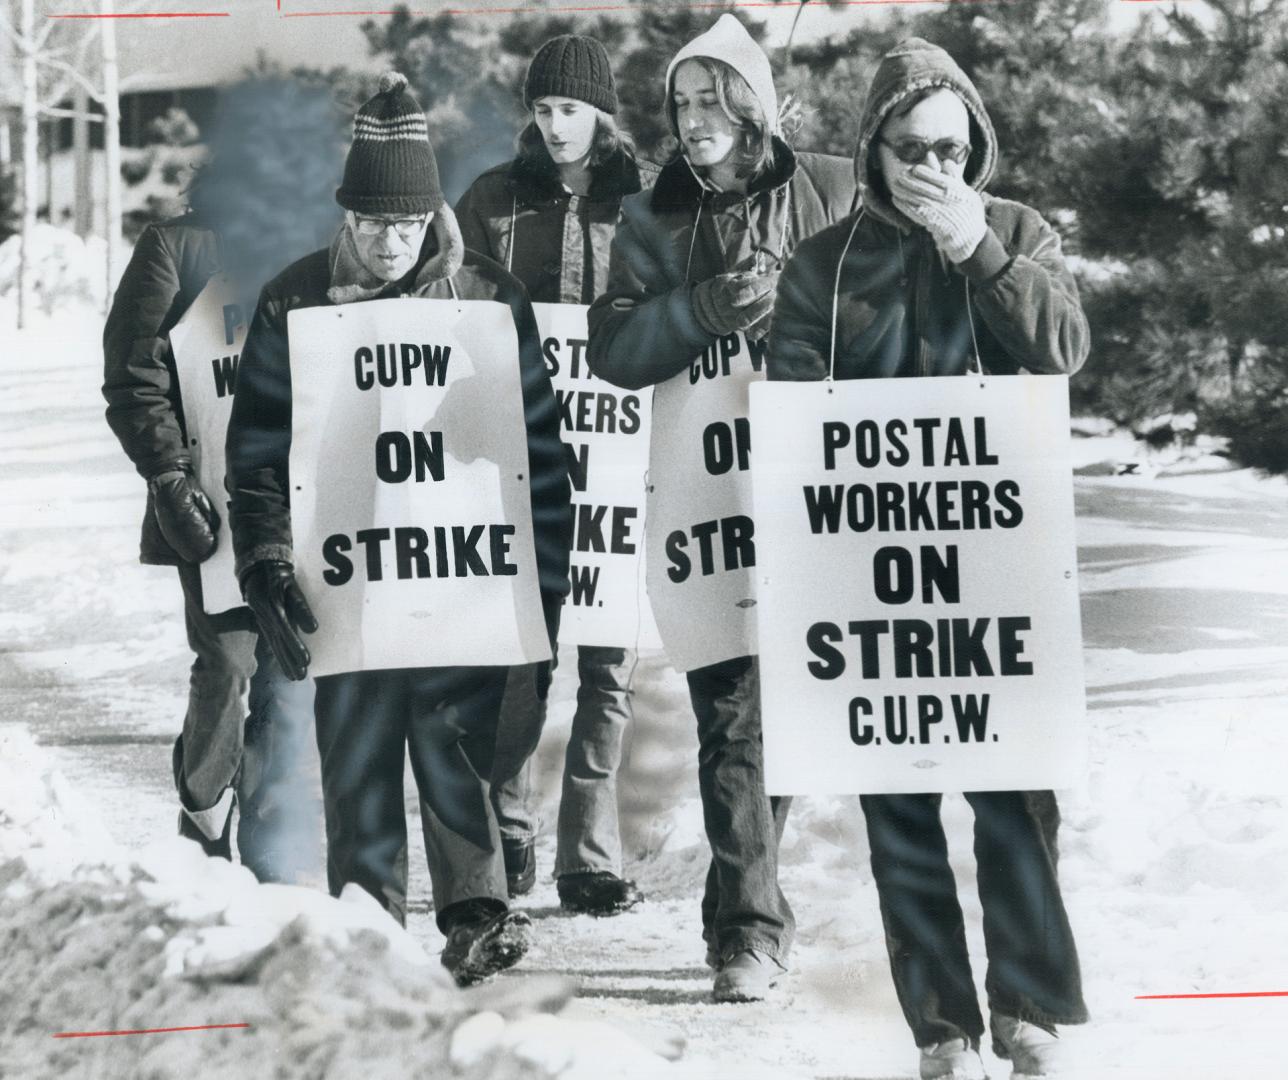 Below-zero weather made life miserable for striking postal workers on the picket line at the Eastern Ave